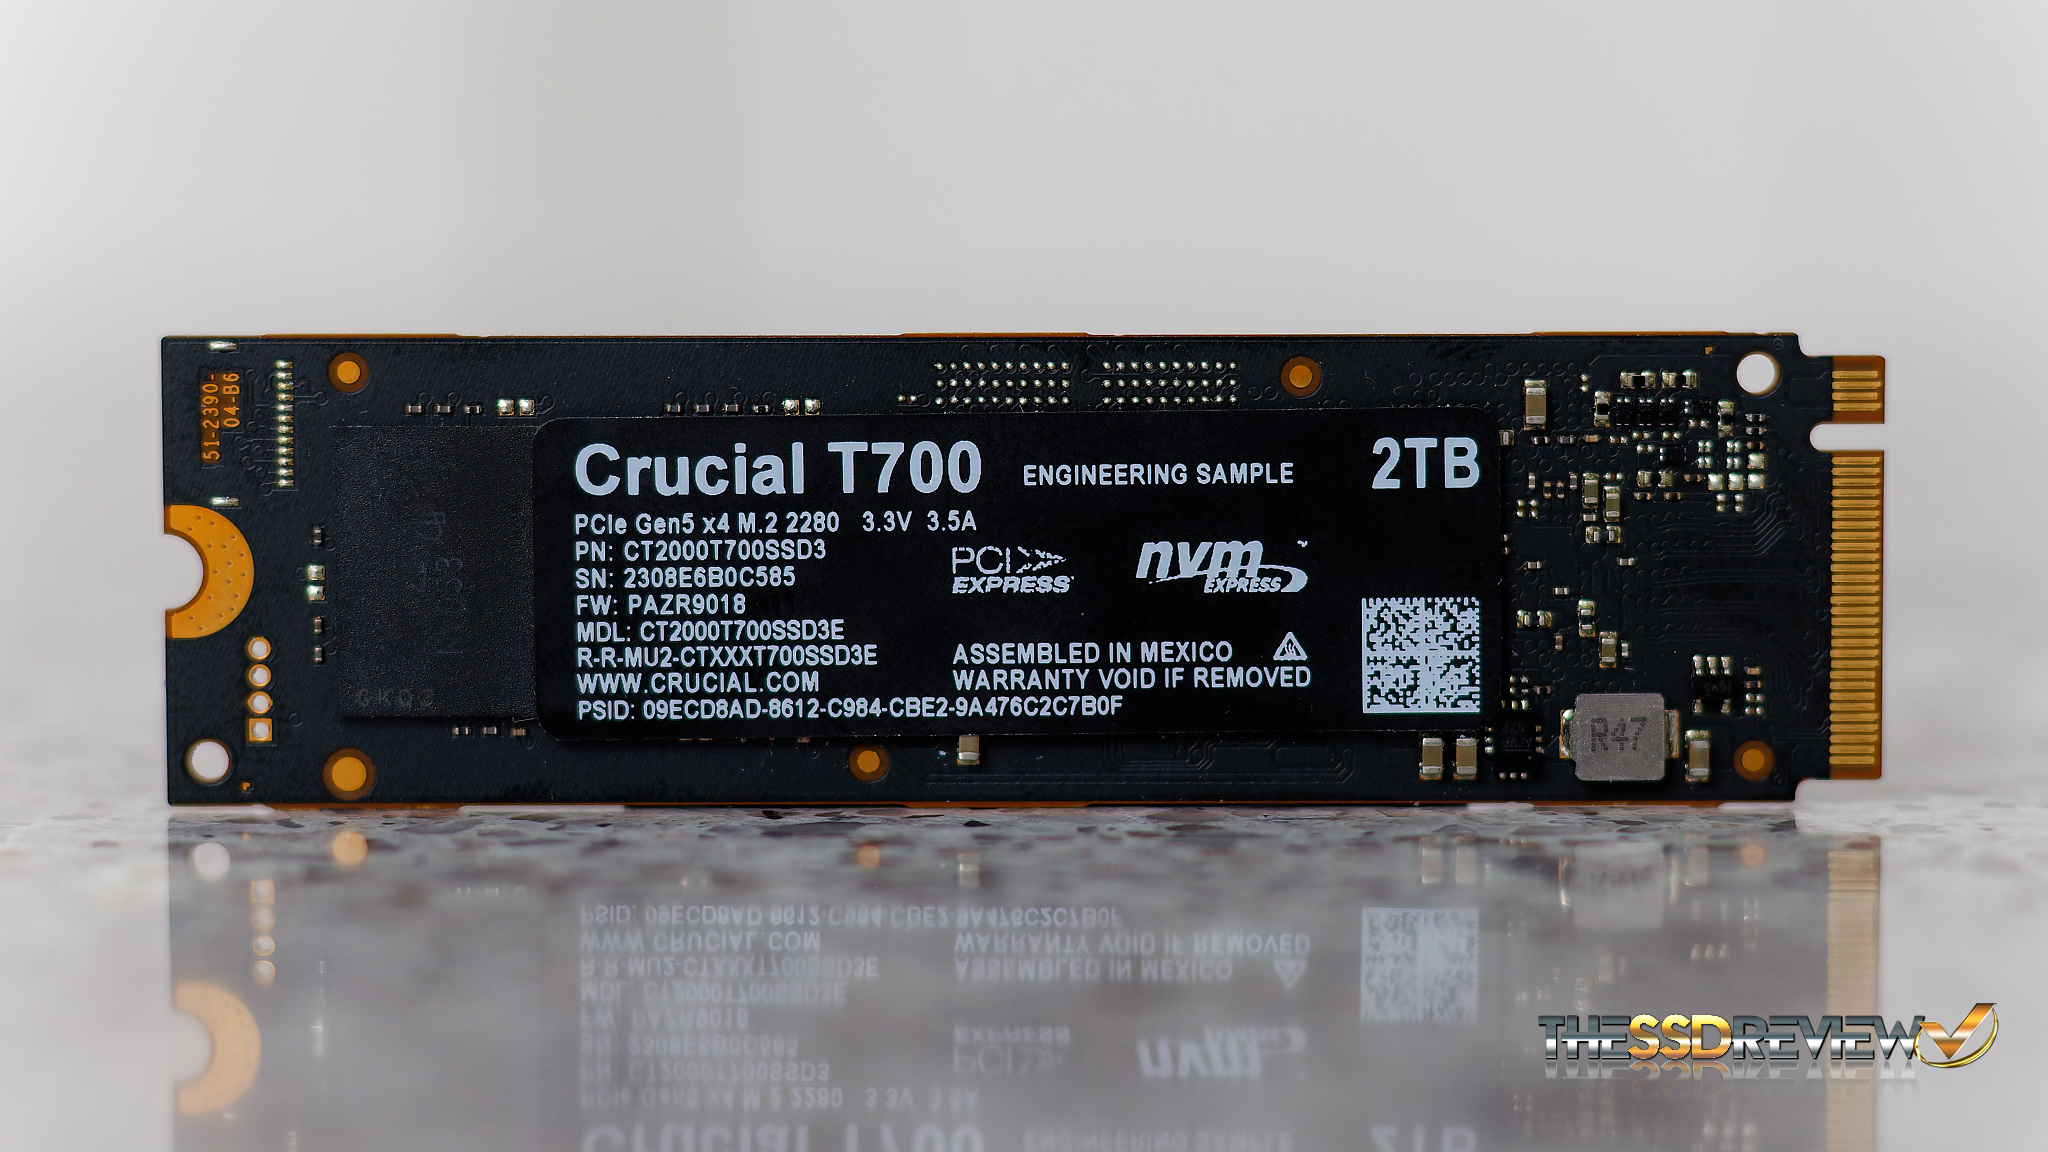 Crucial T700 PCIe Gen 5 SSD Series Now Available for Pre-order